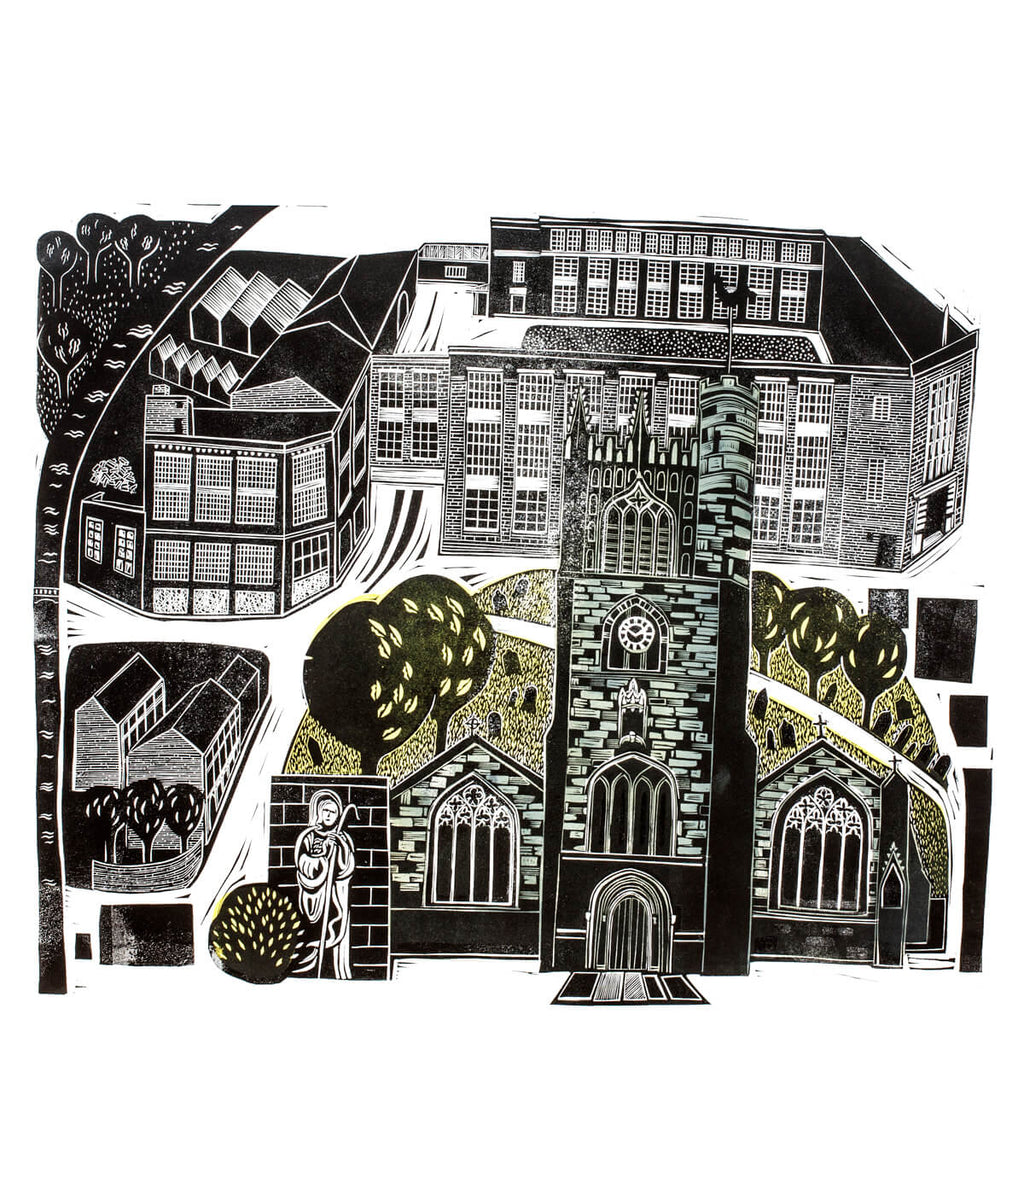 St Margaret’s & The Corah Works, a linocut print by Sarah Kirby